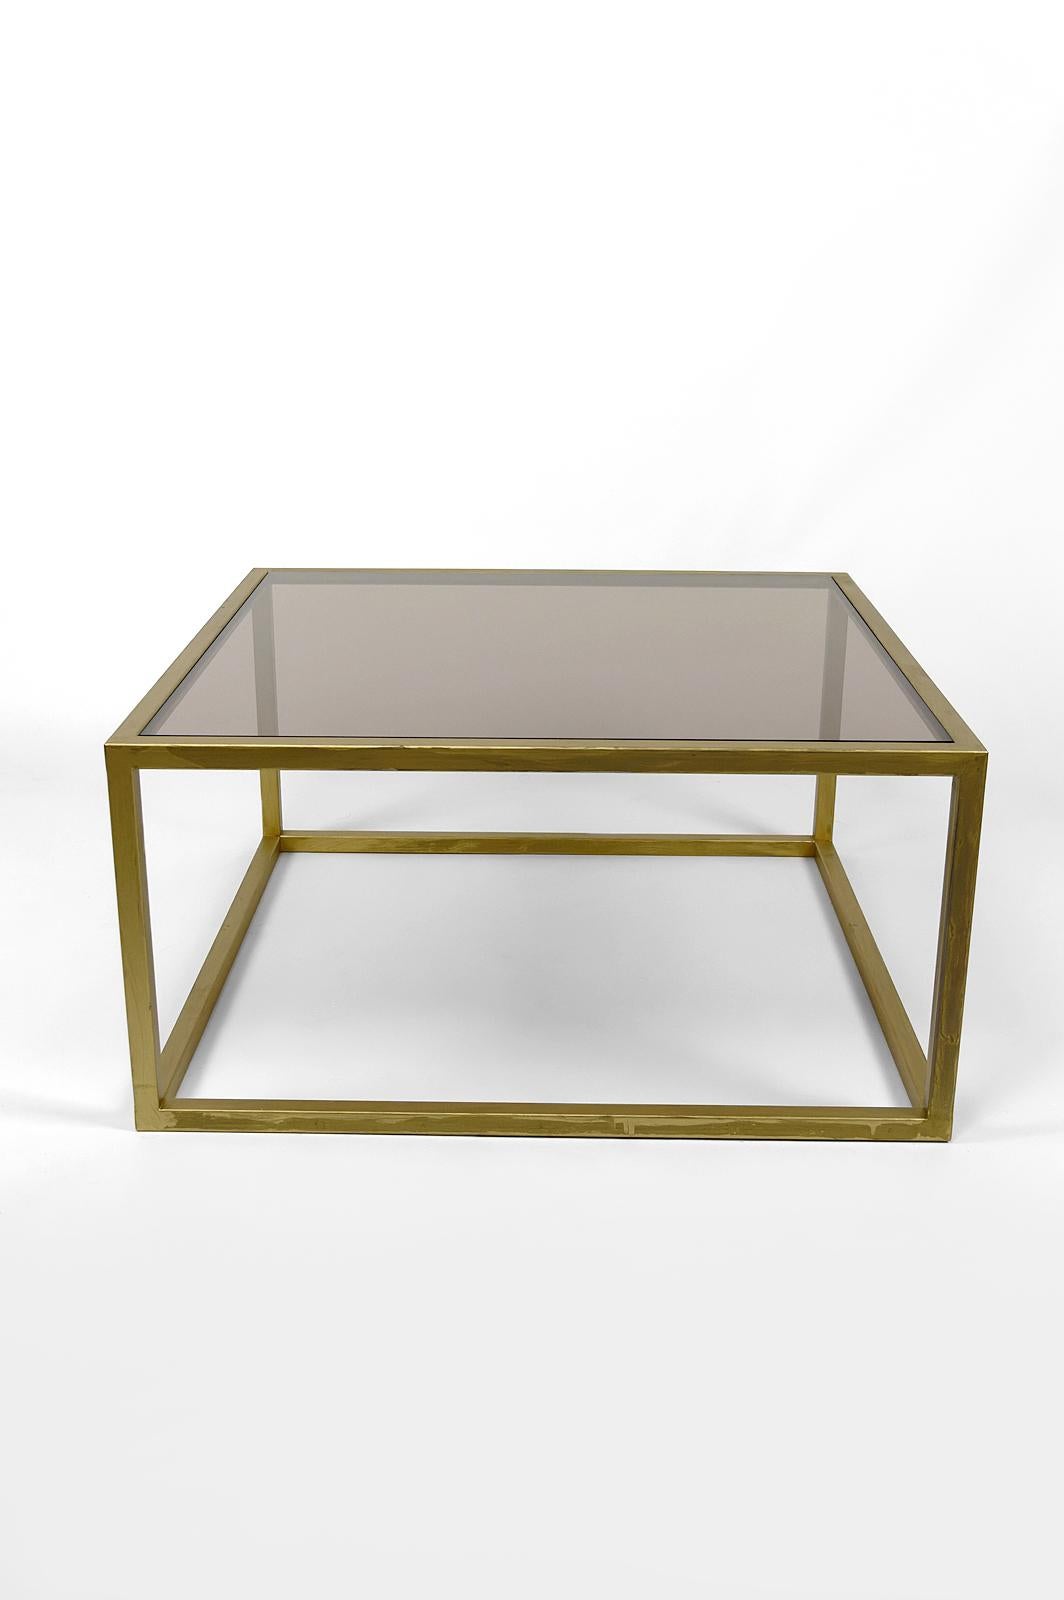 Coffee table in gold painted metal and smoked safety glass top.
France, Circa 1970

Dimensions:
height 40 cm
width 80 cm
depth 80 cm